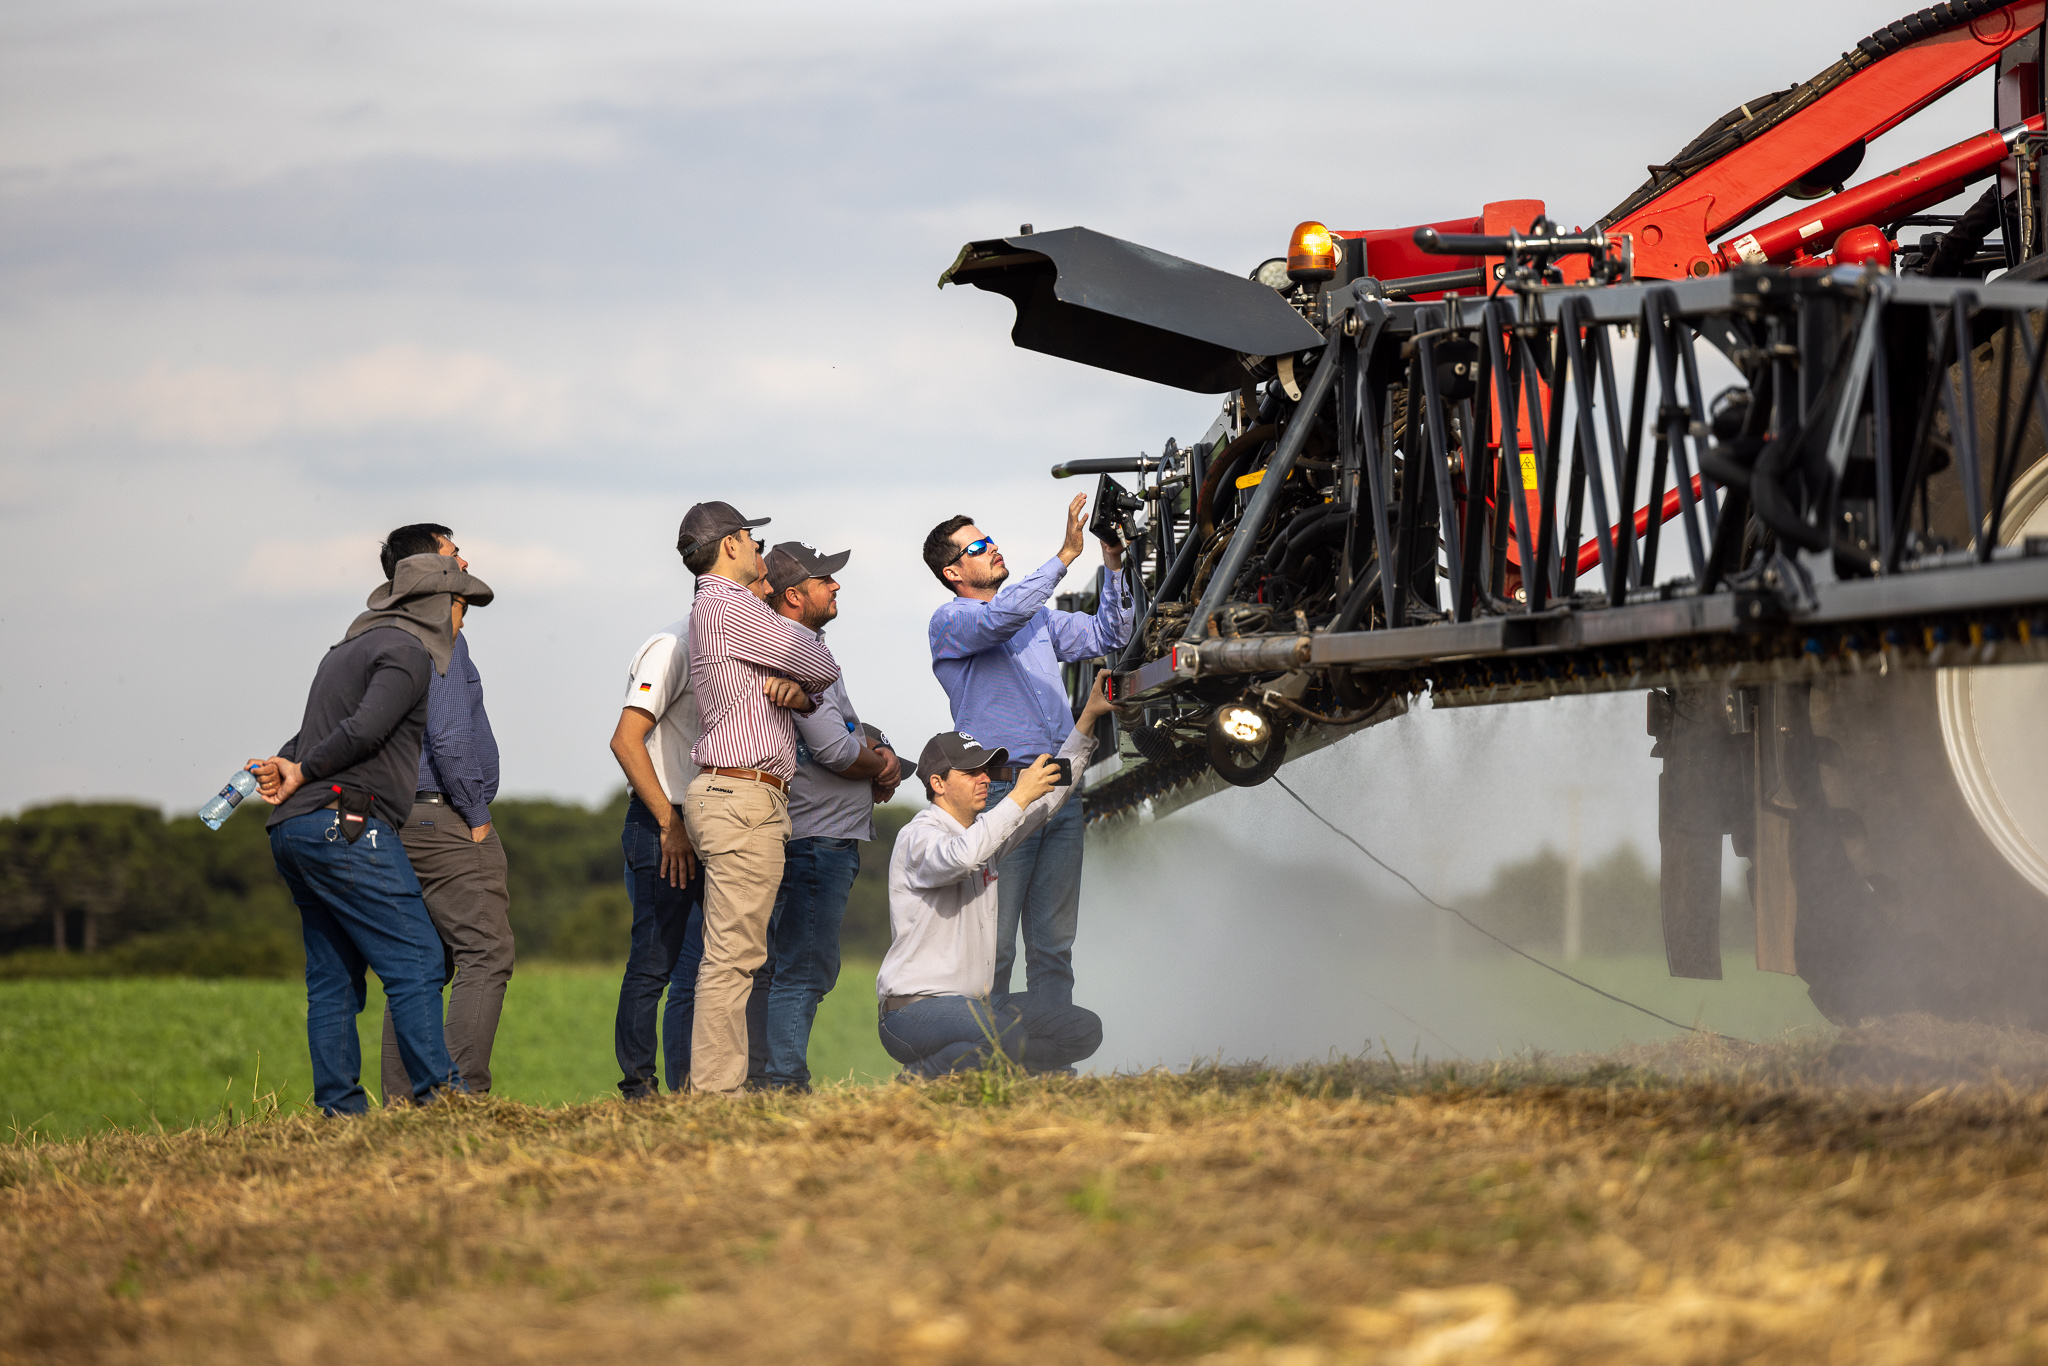 HORSCH offers a training program to optimize the use of your equipment in the field